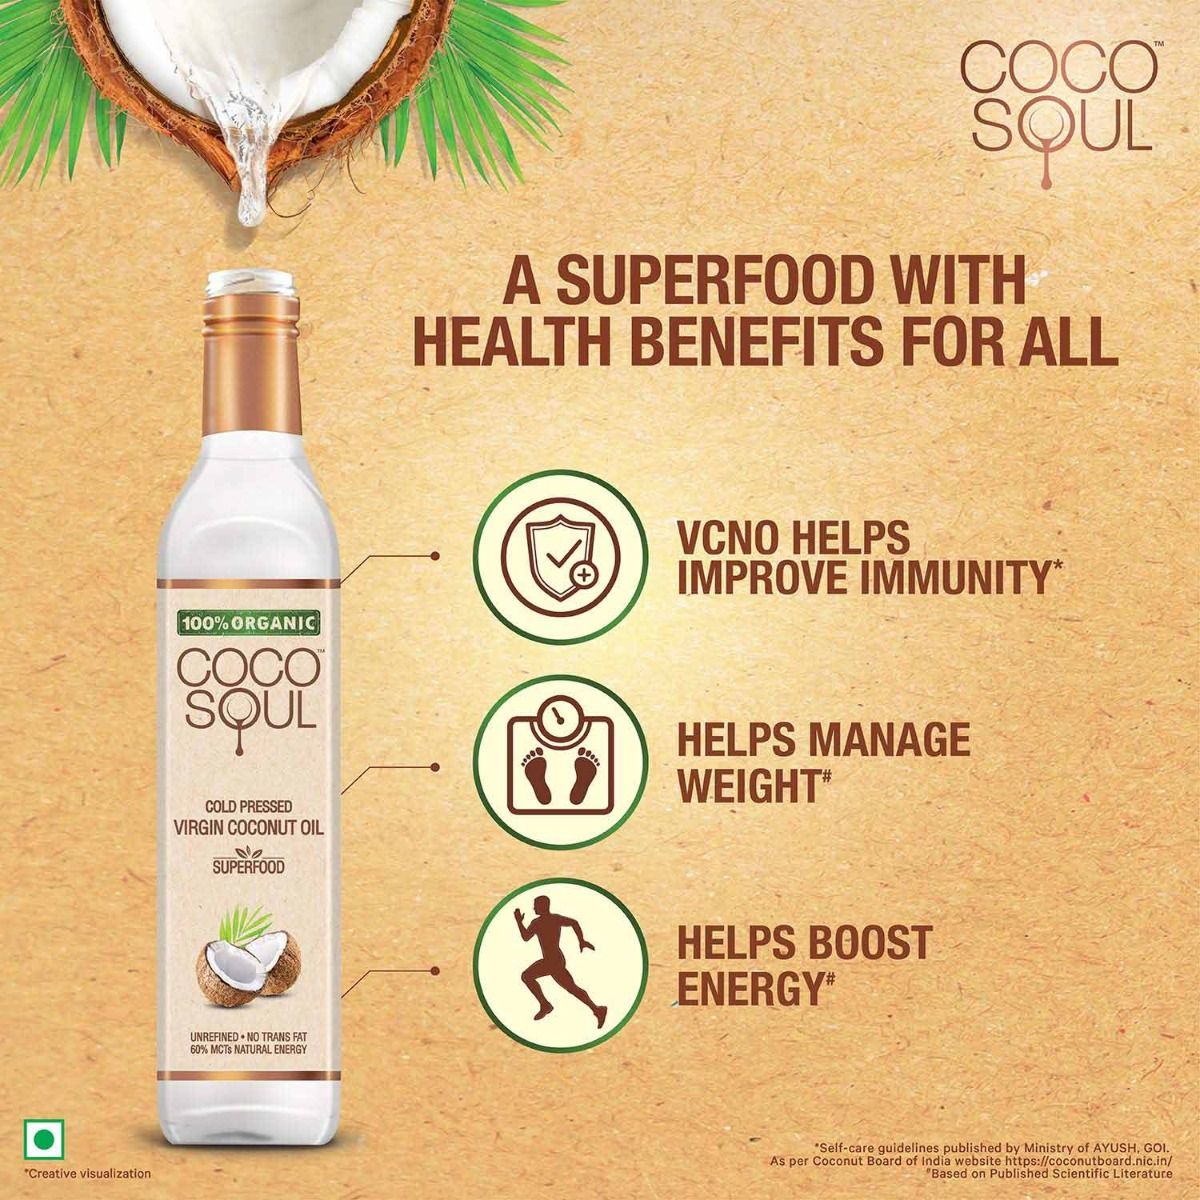 Coco Soul Cold Pressed Virgin Coconut Oil, 250 ml, Pack of 1 